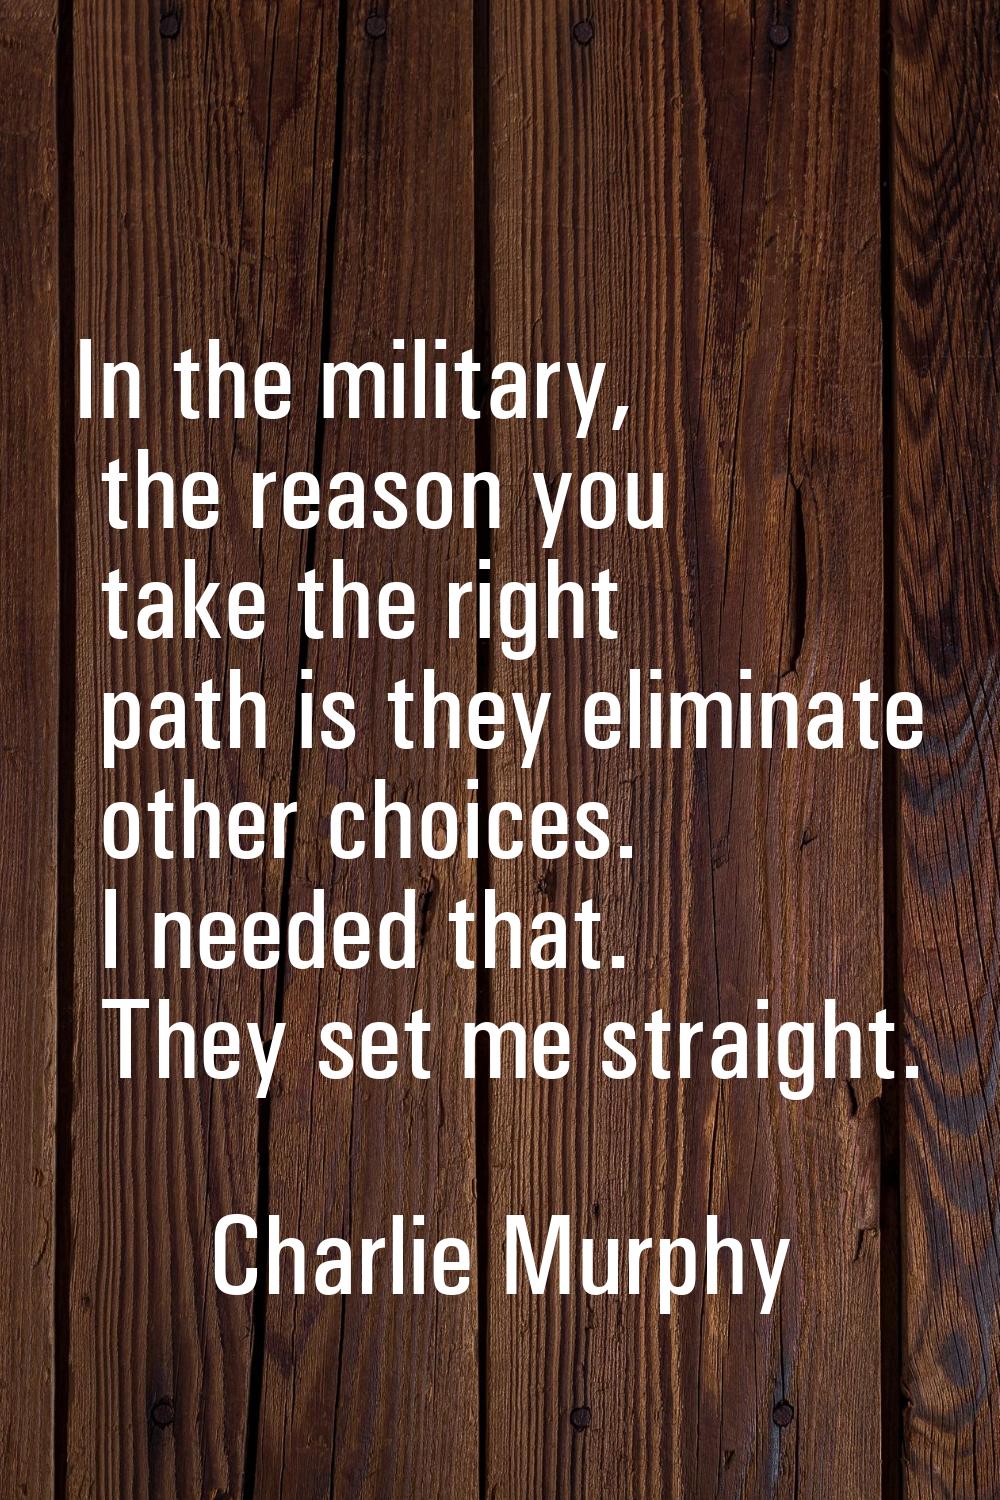 In the military, the reason you take the right path is they eliminate other choices. I needed that.